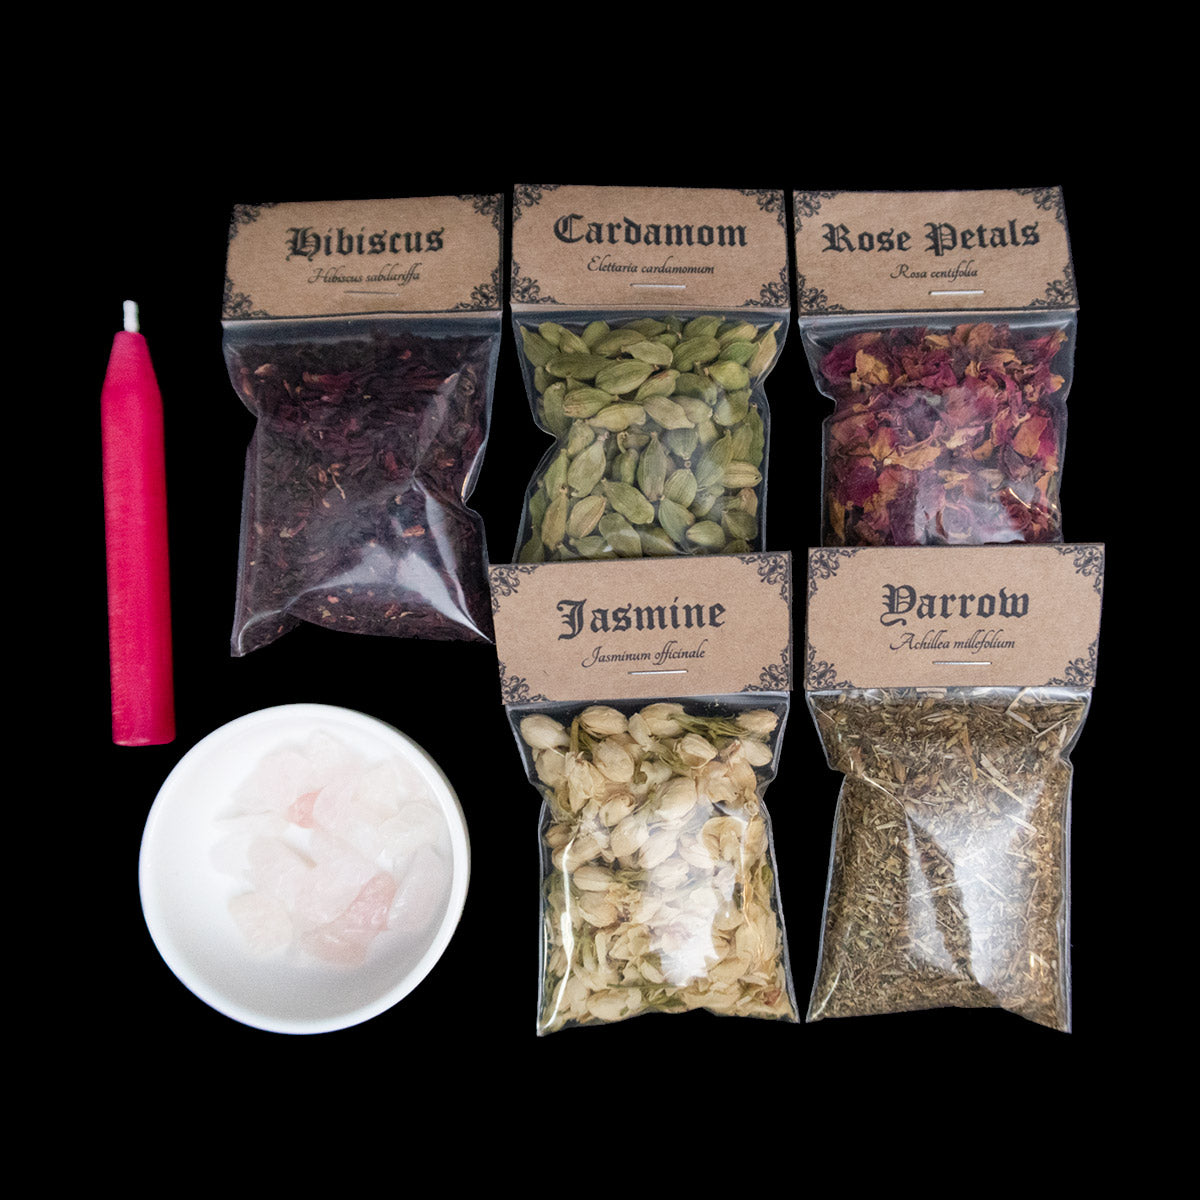 A pink chime candle, small bowl of large rose quartz crystal chips, and 5 bags of herbs with Victorian-apothecary-style brown labels at the top give the common and Latin names